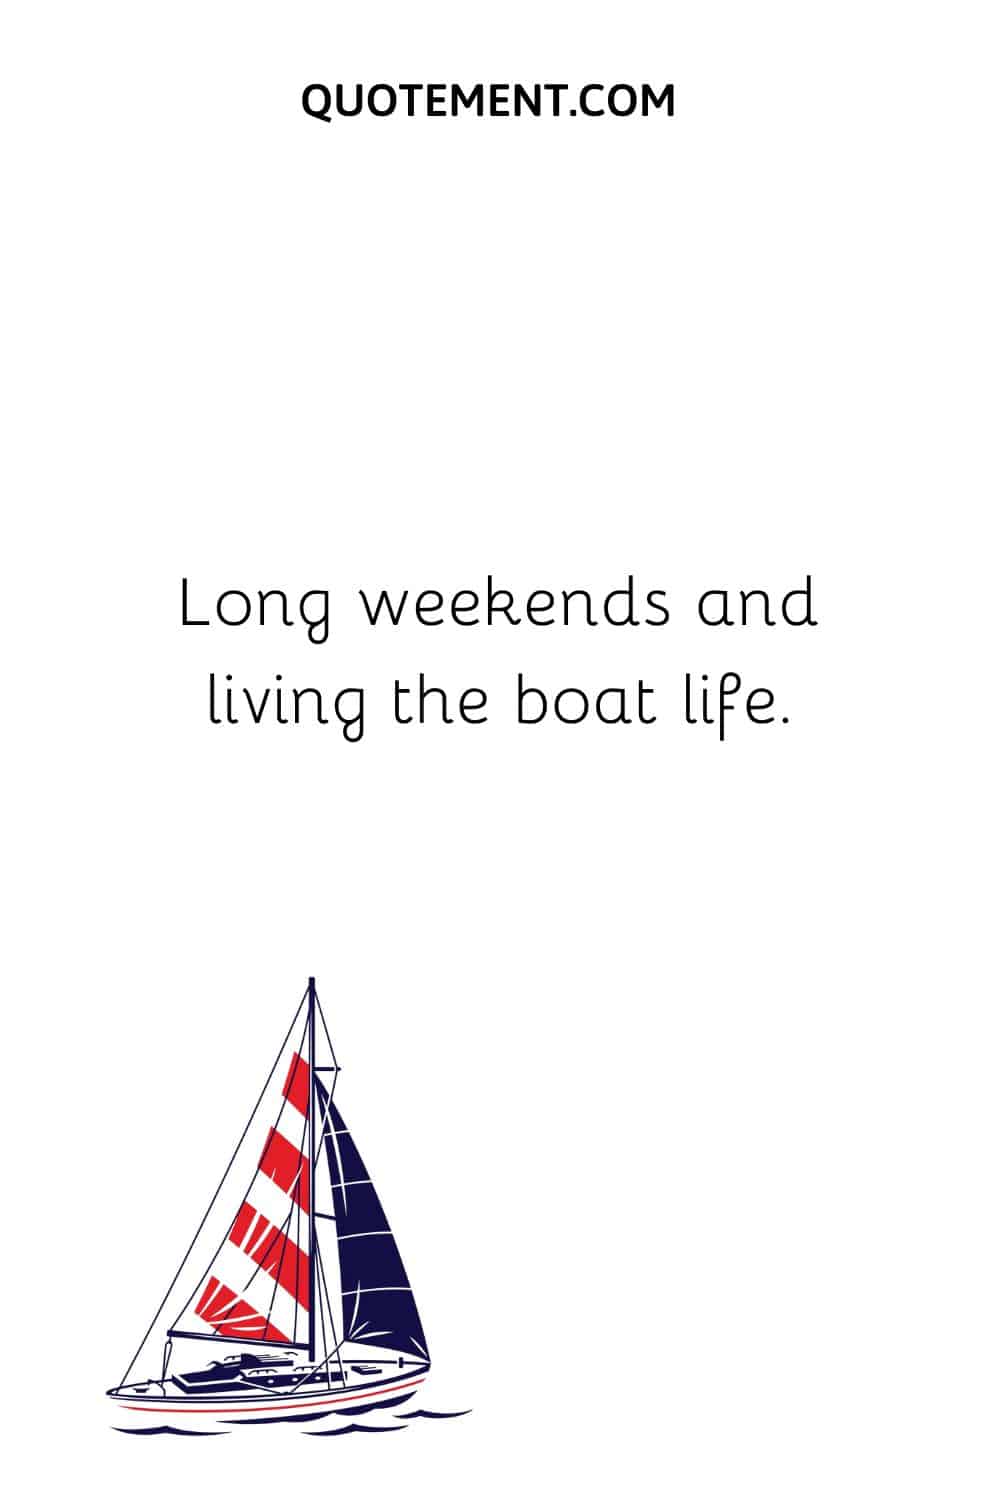 Long weekends and living the boat life